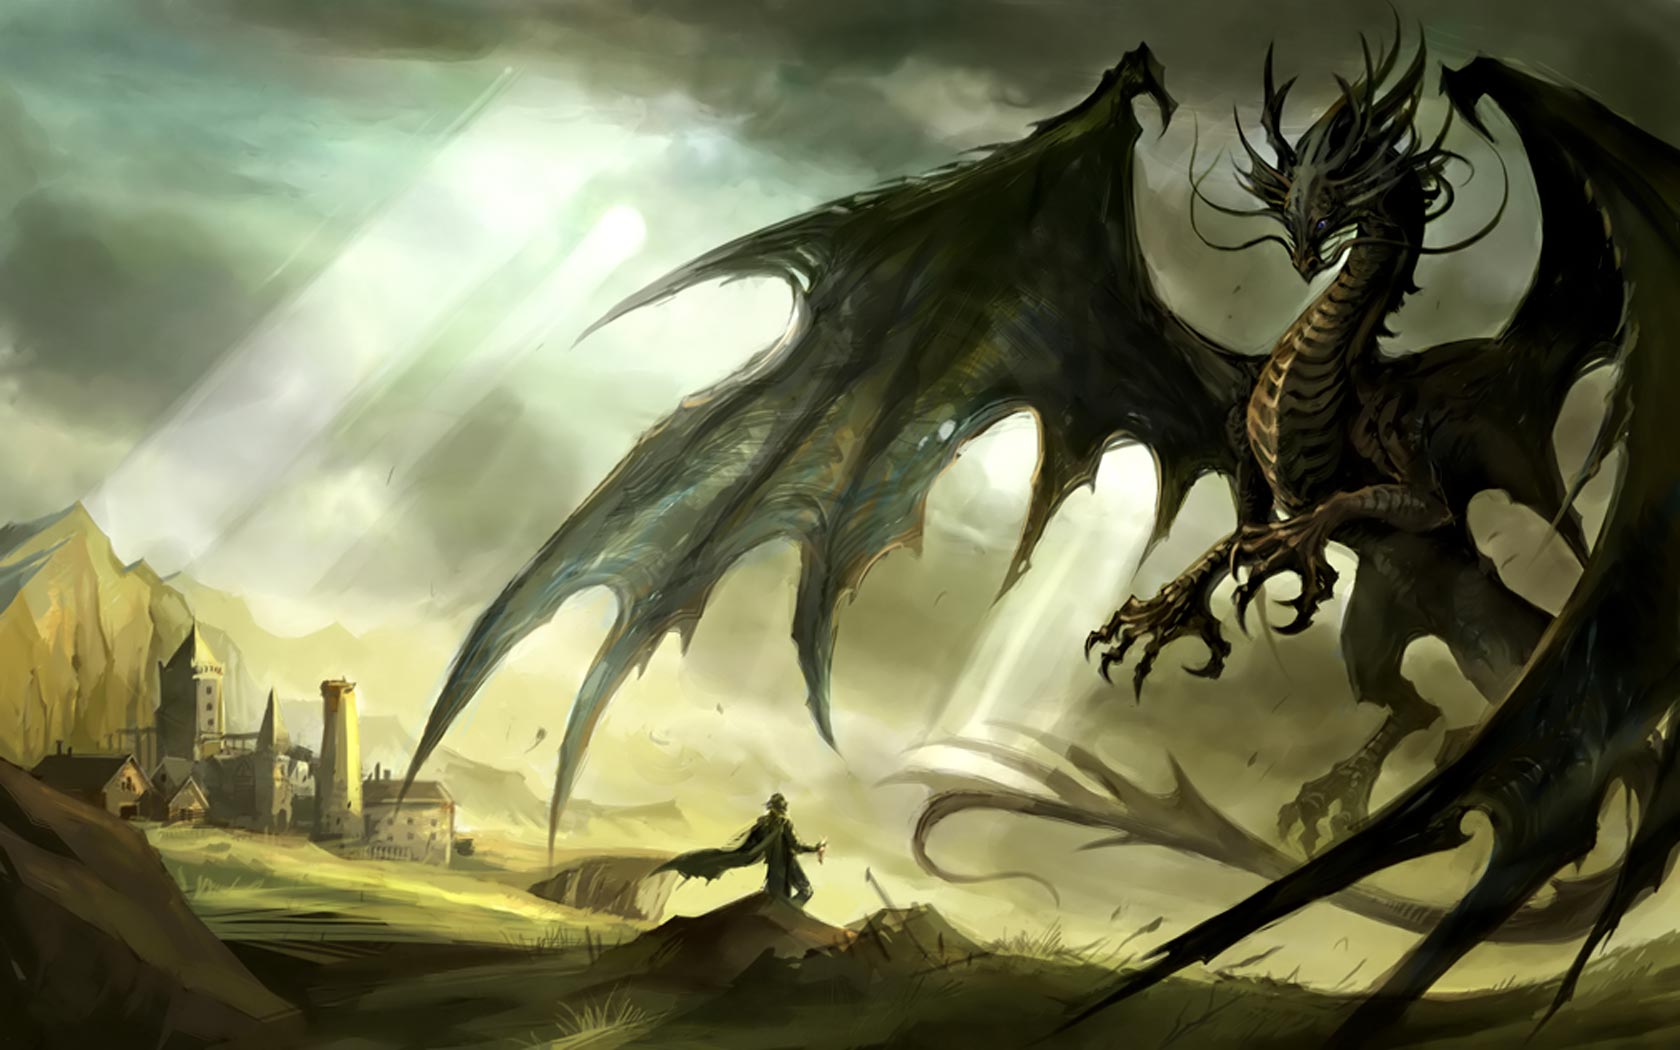 Dragon and Knight backgrounds Wallpaper High Quality Wallpapers